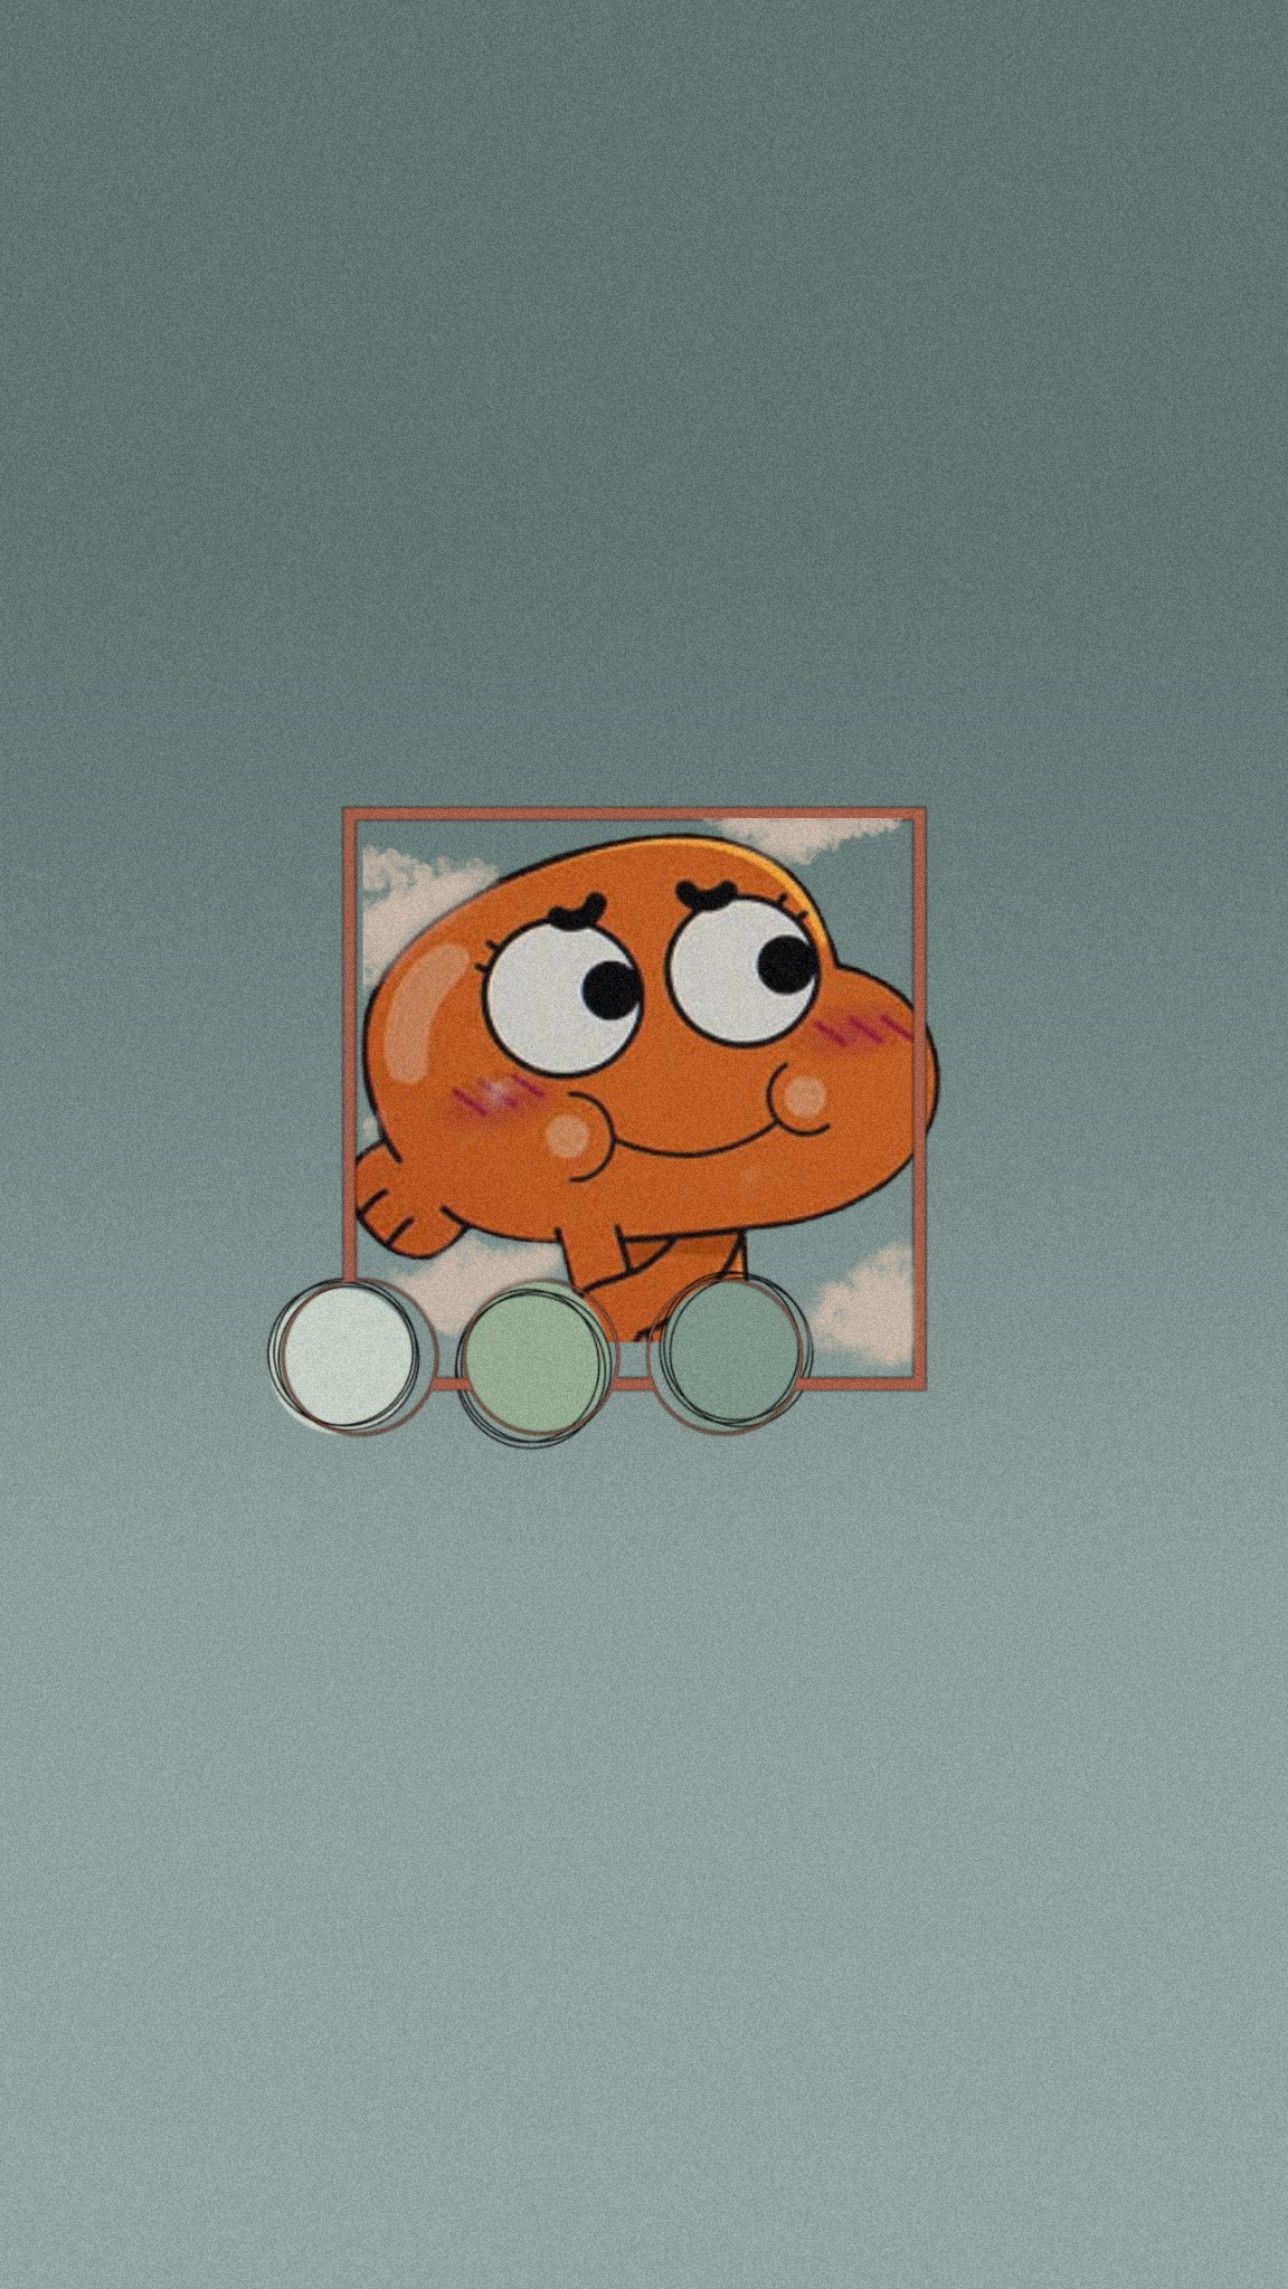 Gumball Aesthetic Wallpapers